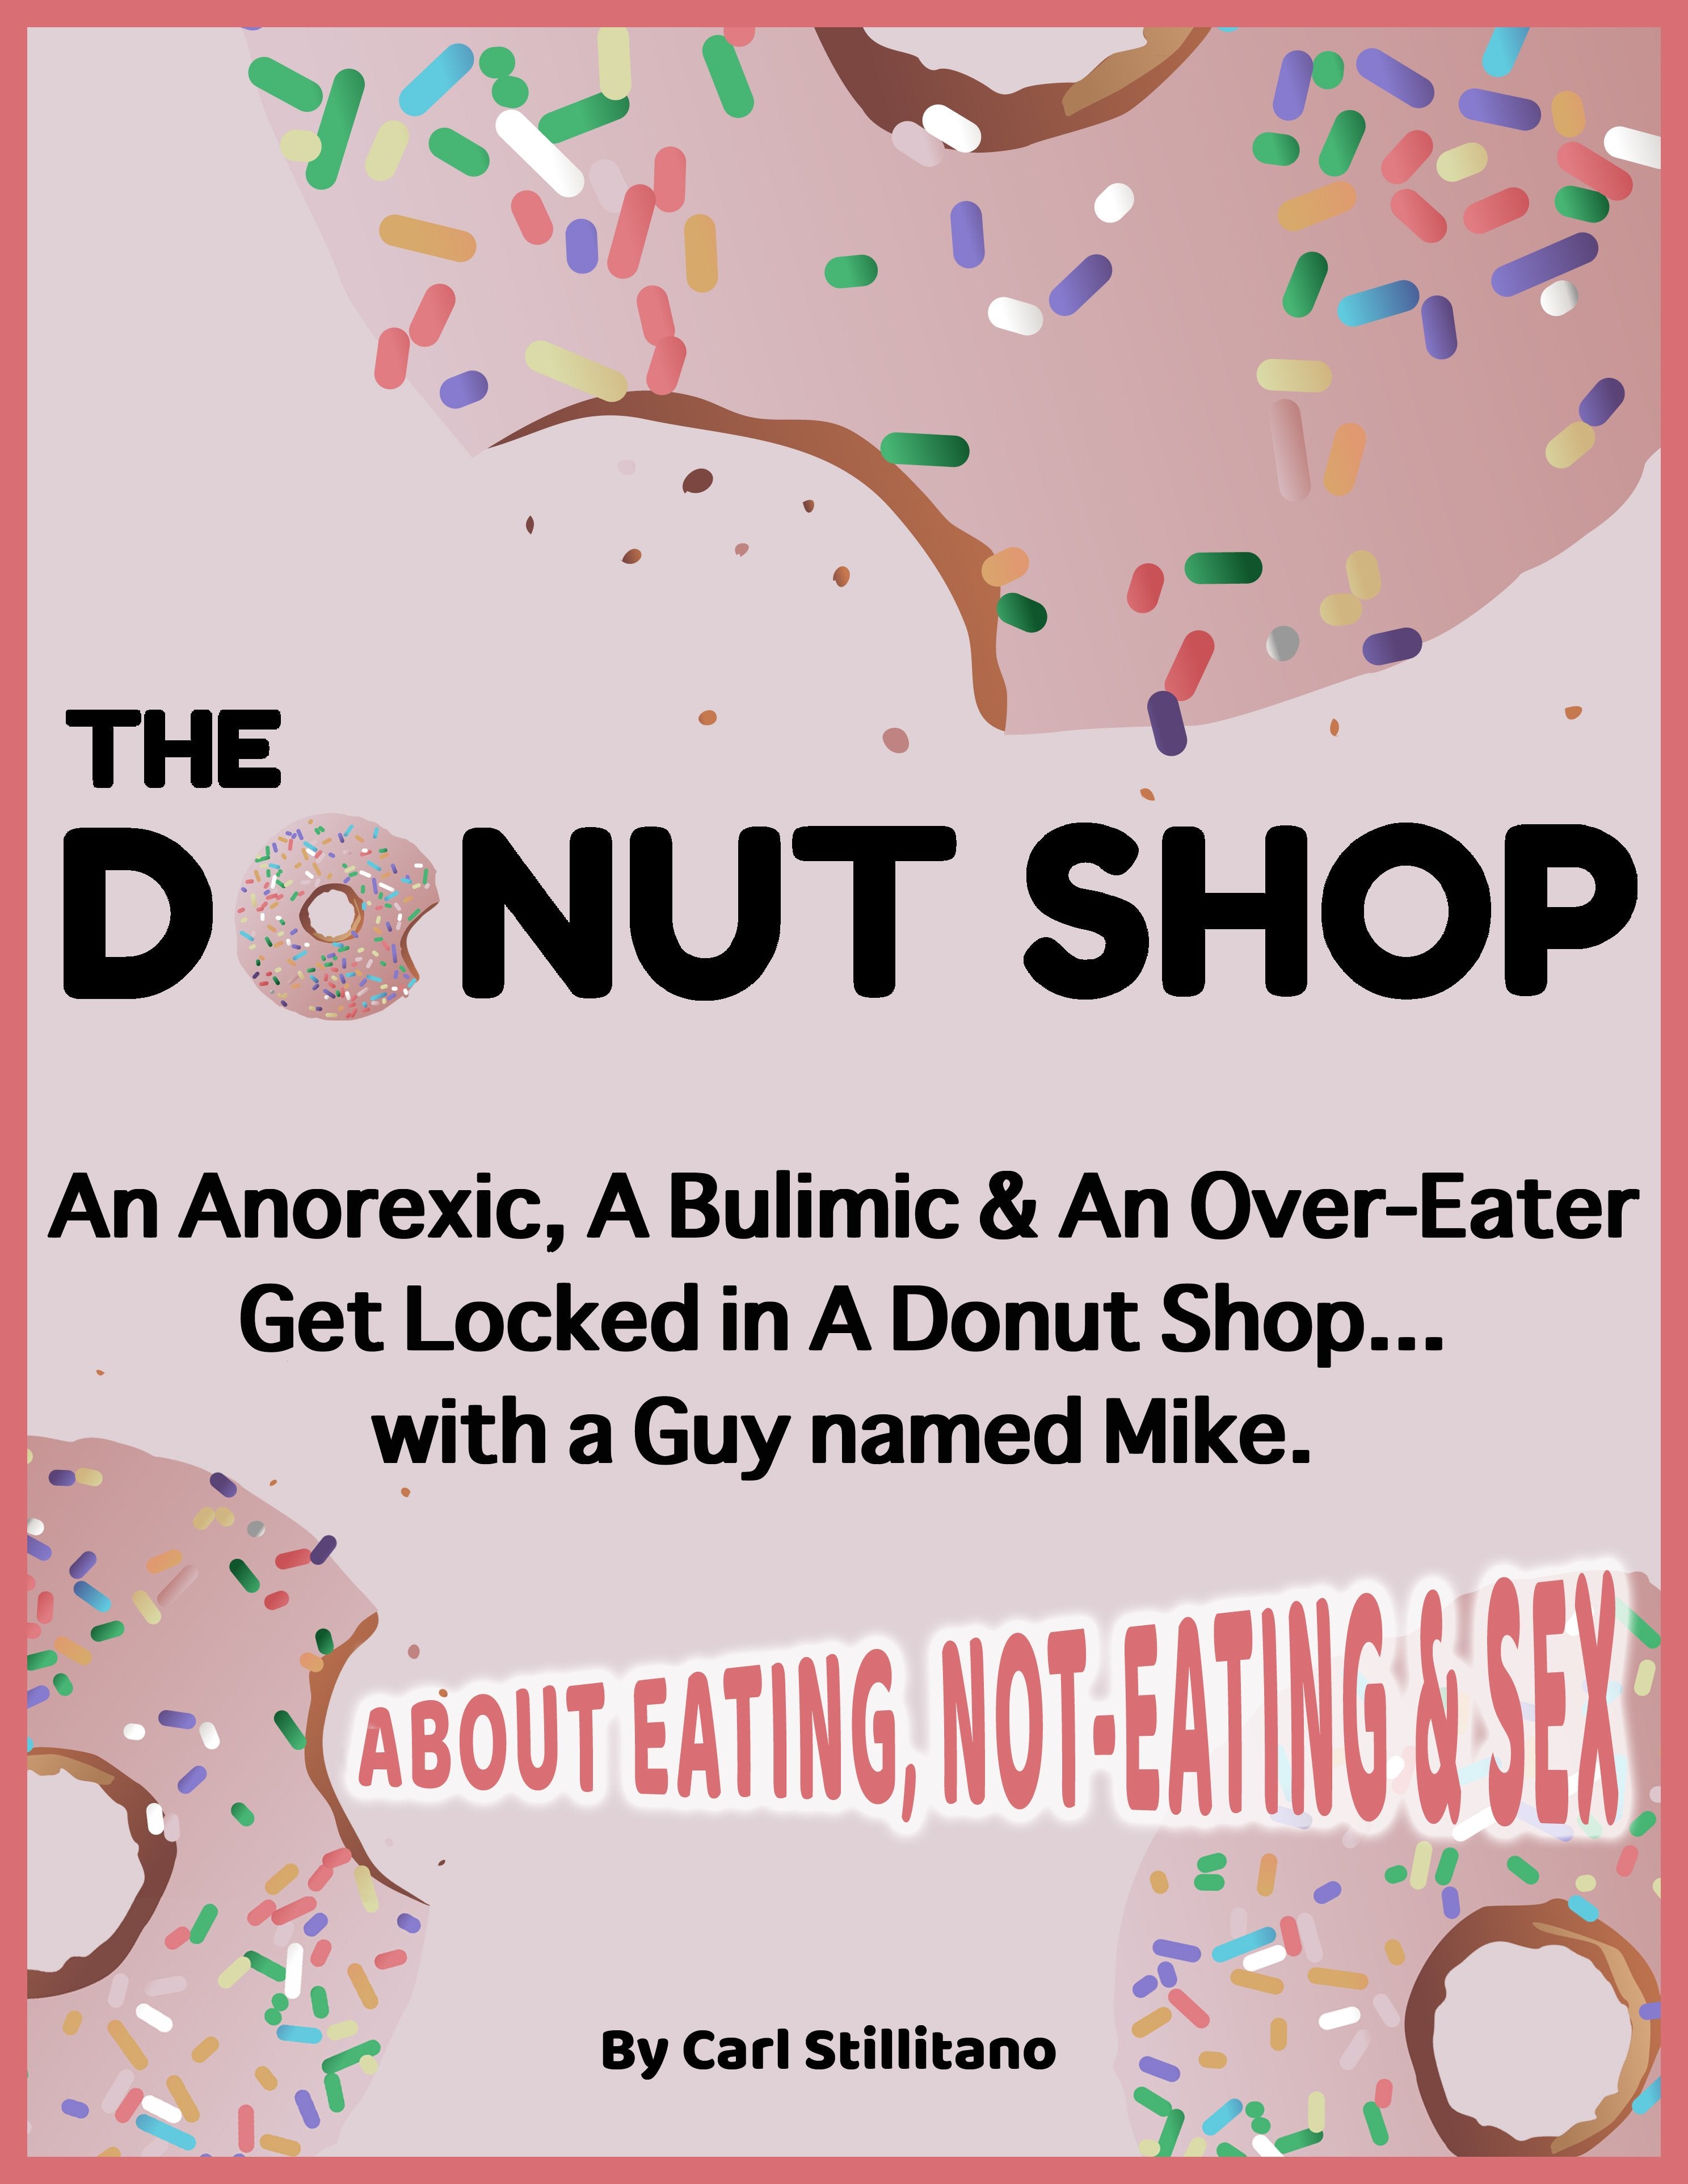 The Donut Shop Transformative Play